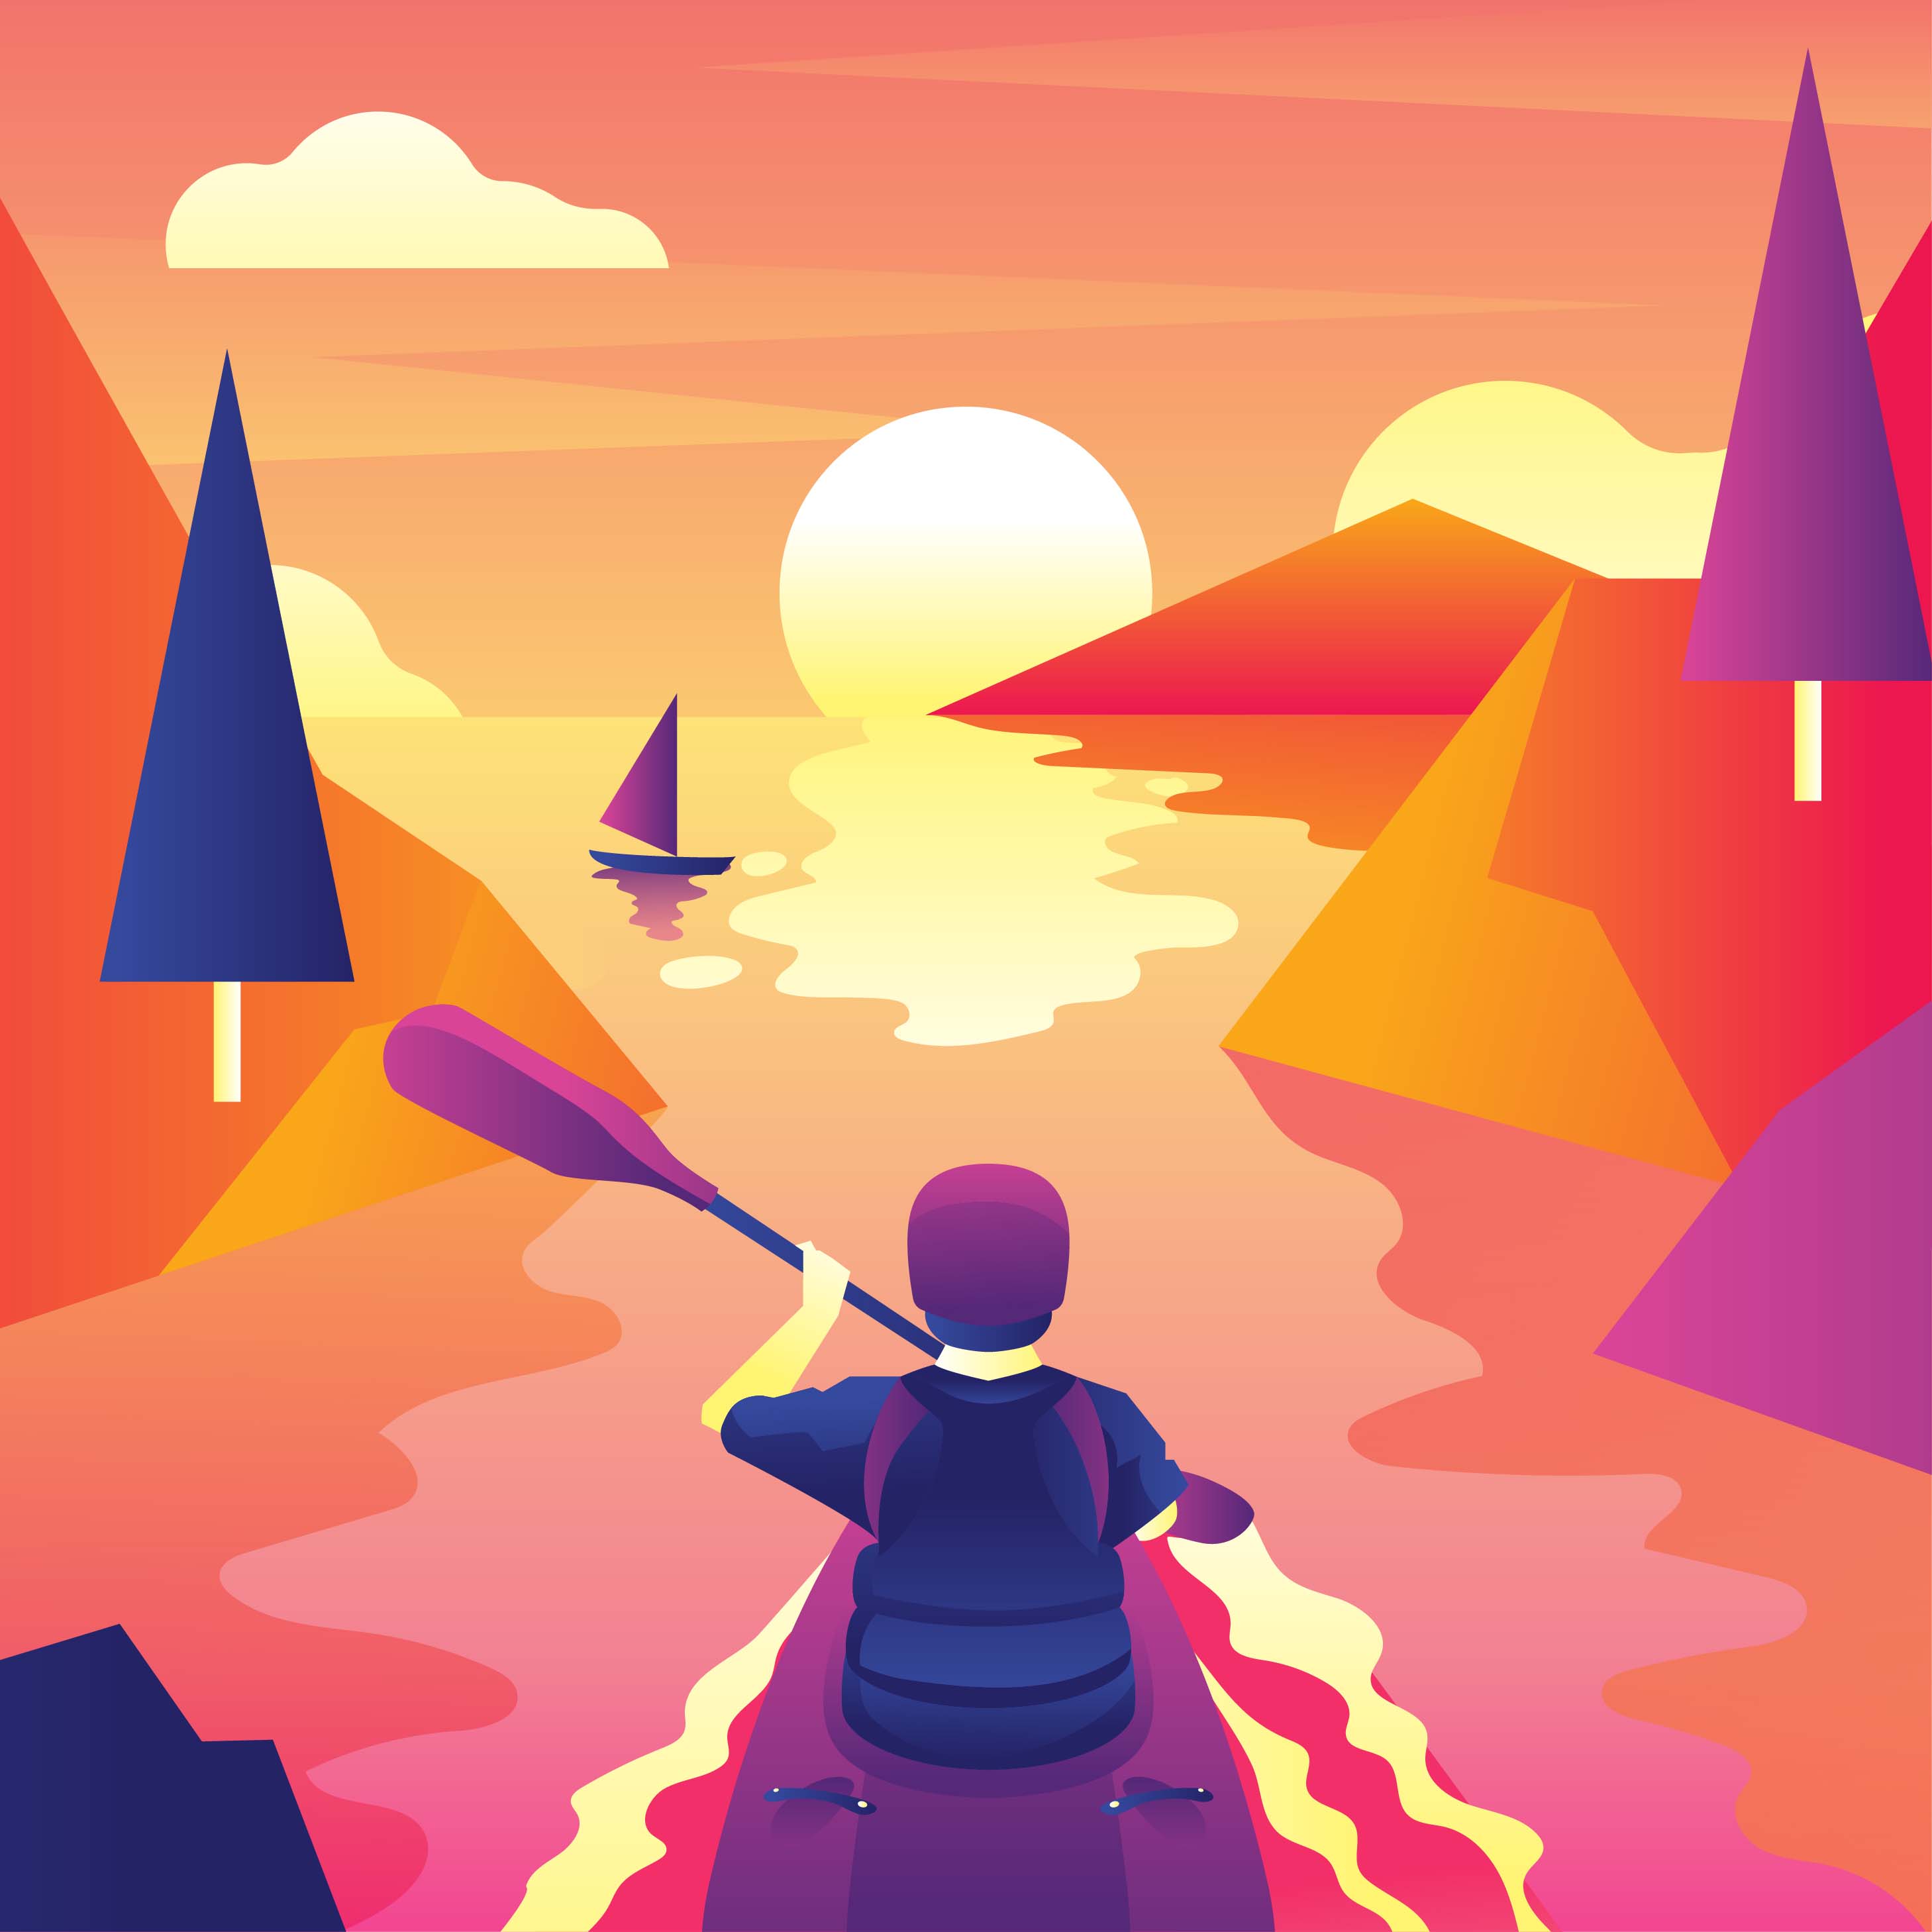 Kayaking First Person View - Download Free Vectors ...